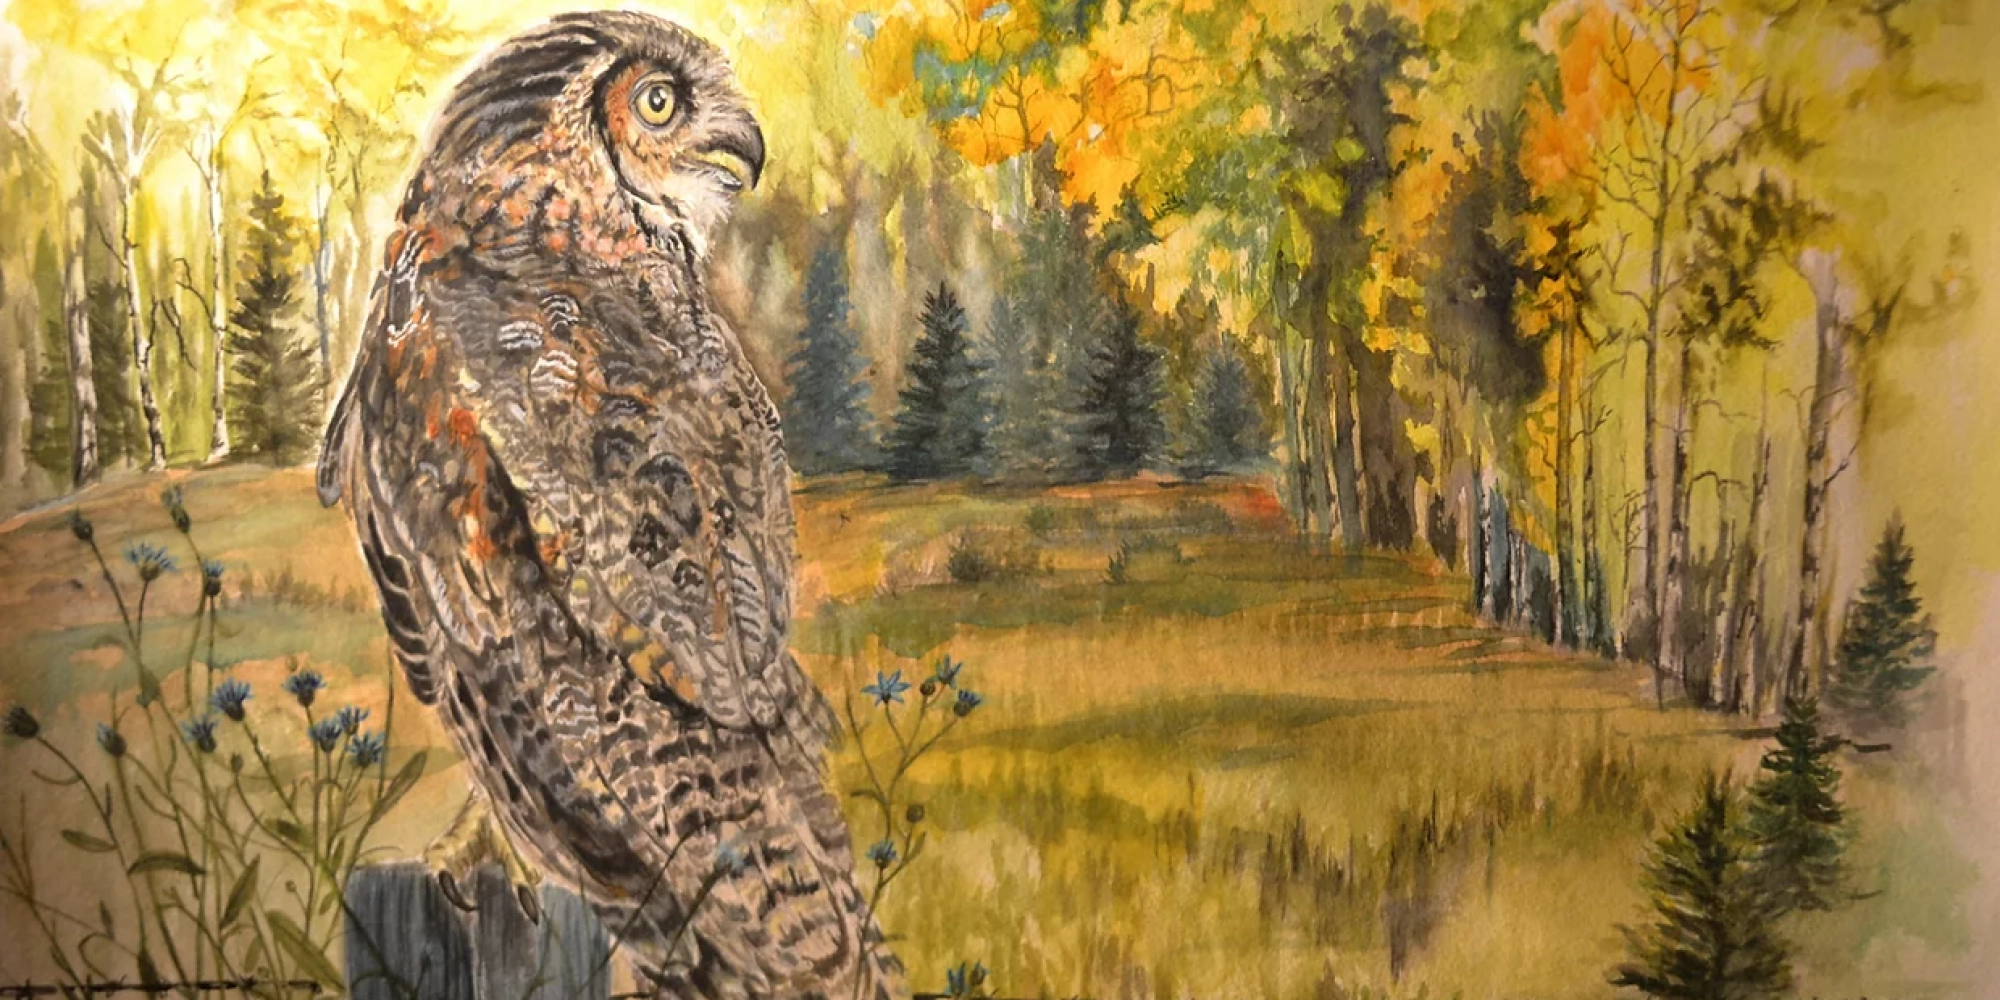 King of the Meadow" 
Great Horned owl overlooking a meadow in aspen trees. 9x12 prints avalilable.